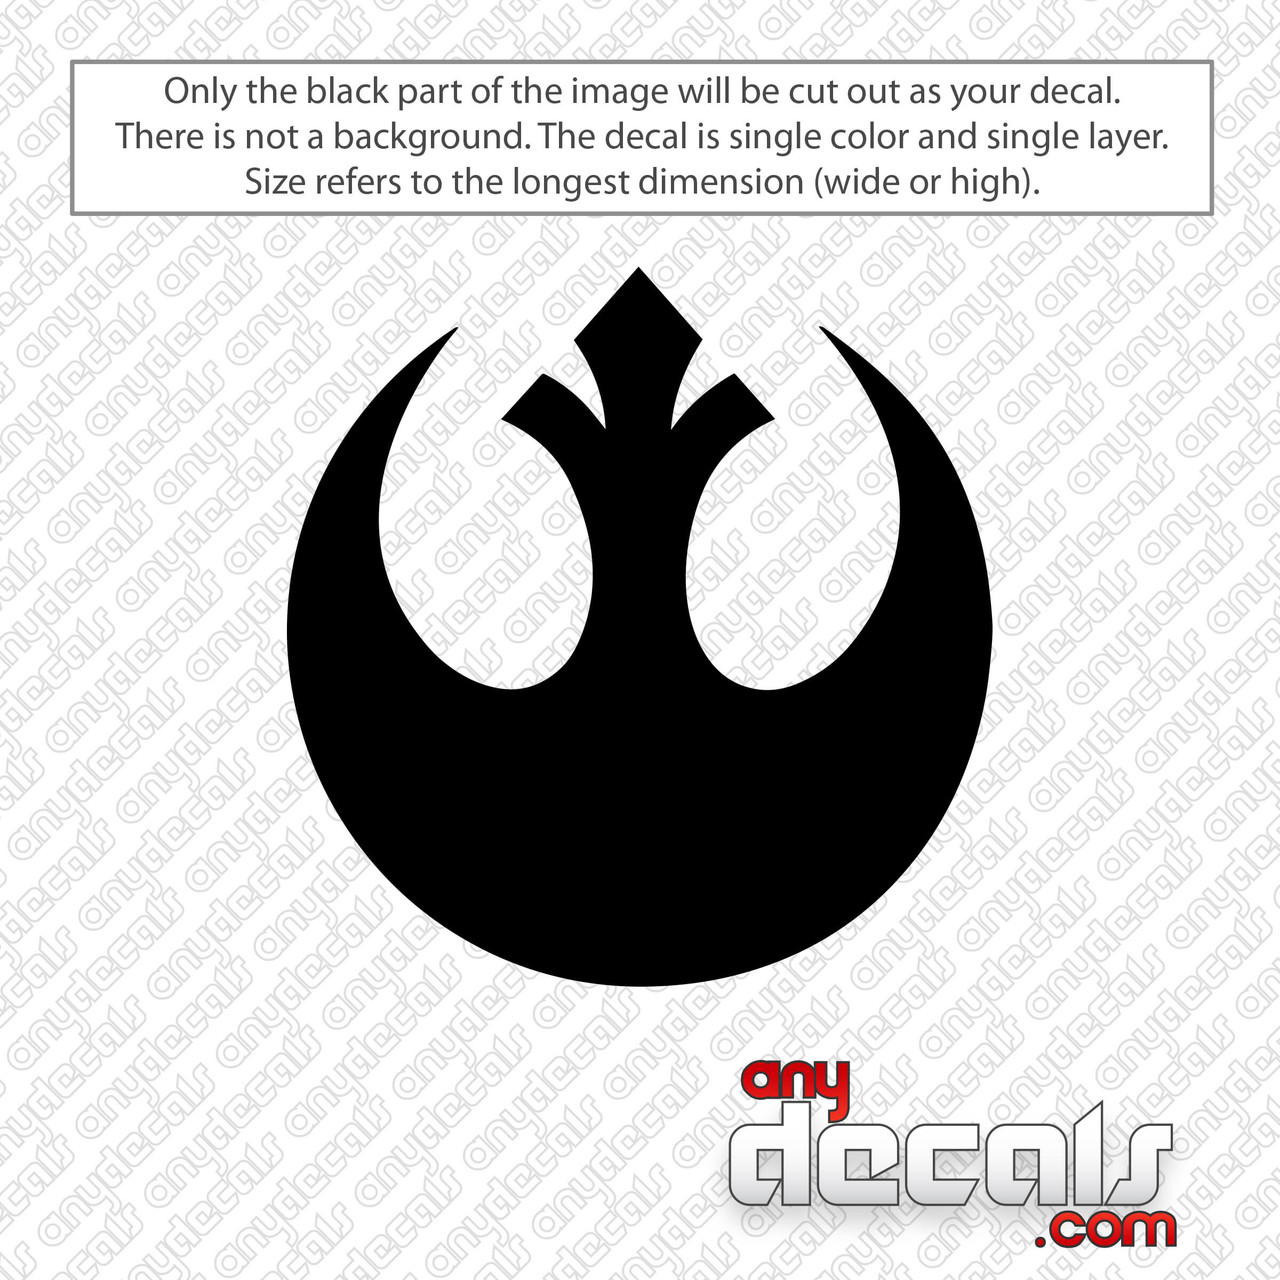 https://cdn11.bigcommerce.com/s-df97c/images/stencil/1280x1280/products/890/1889/star-wars-rebel-symbol-decal-sticker__50353.1592976378.jpg?c=2?imbypass=on